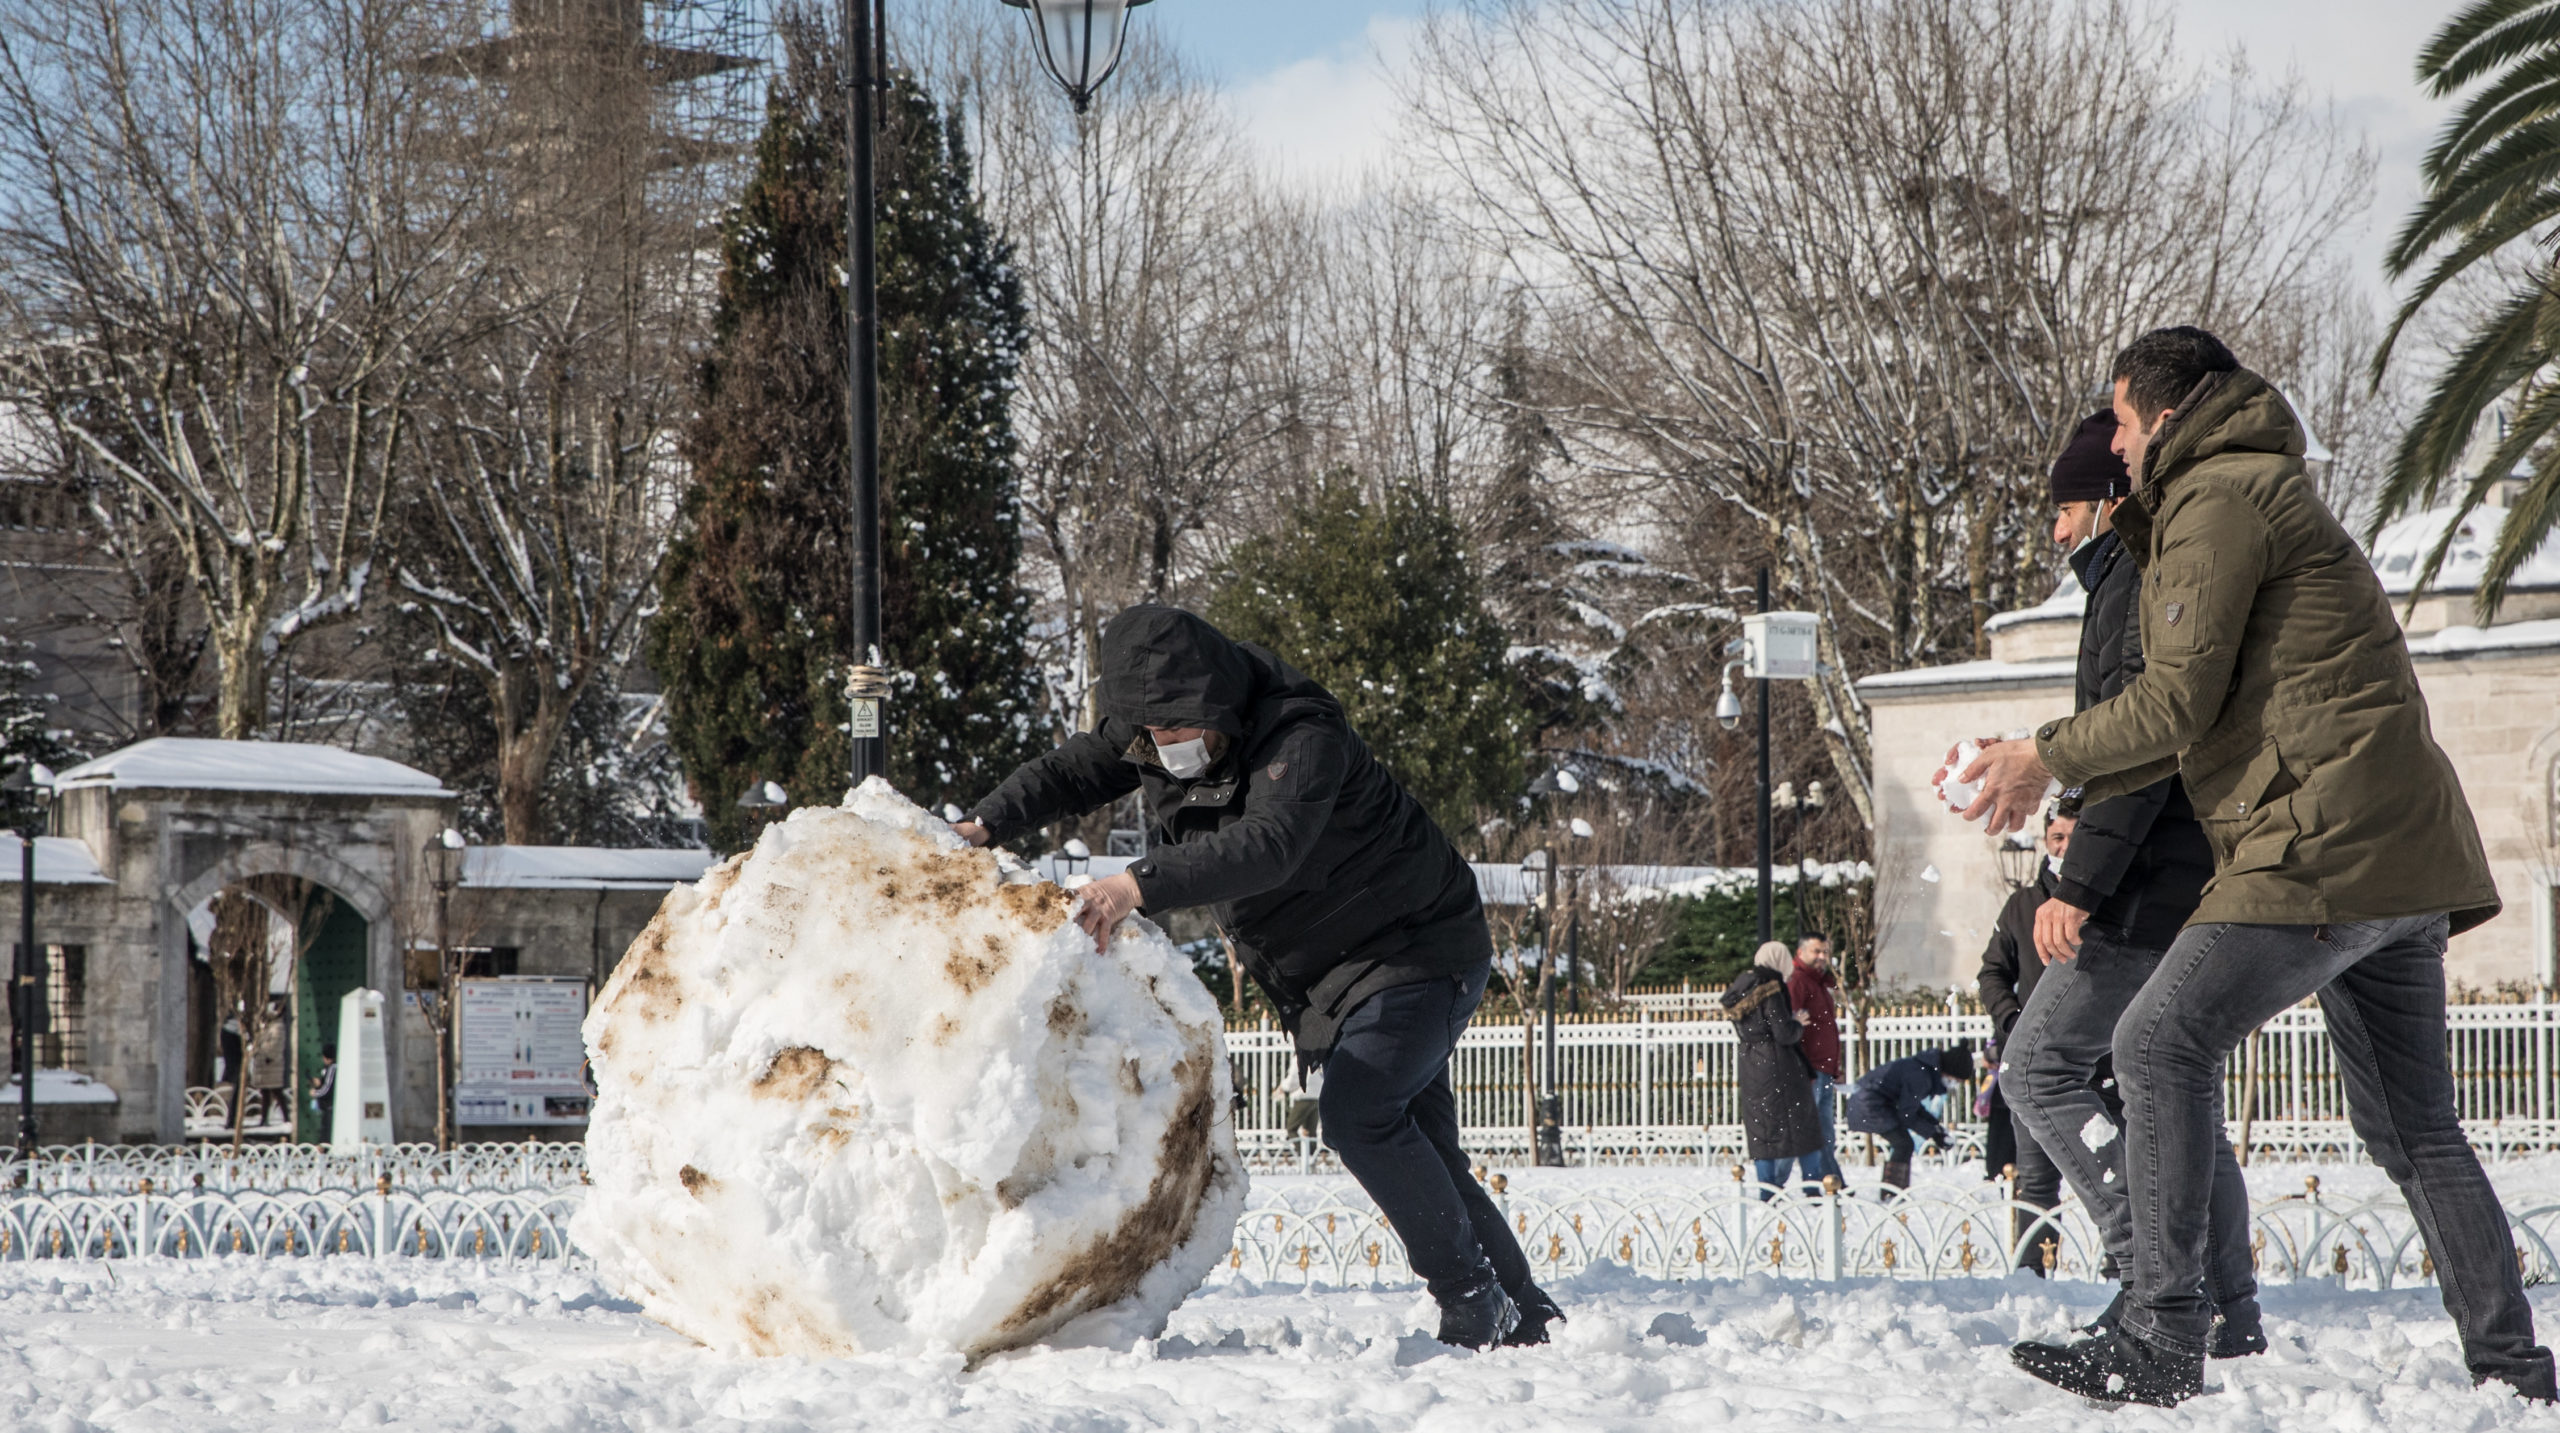 A man pushes a large snowball in front of the Blue Mosque on February 17, 2021 in Istanbul, Turkey. An overnight cold front brought heavy snowfall to Istanbul in the early morning, covering the city in snow, delaying morning commutes, and disrupting ferry services. (Photo: Chris McGrath, Getty Images)